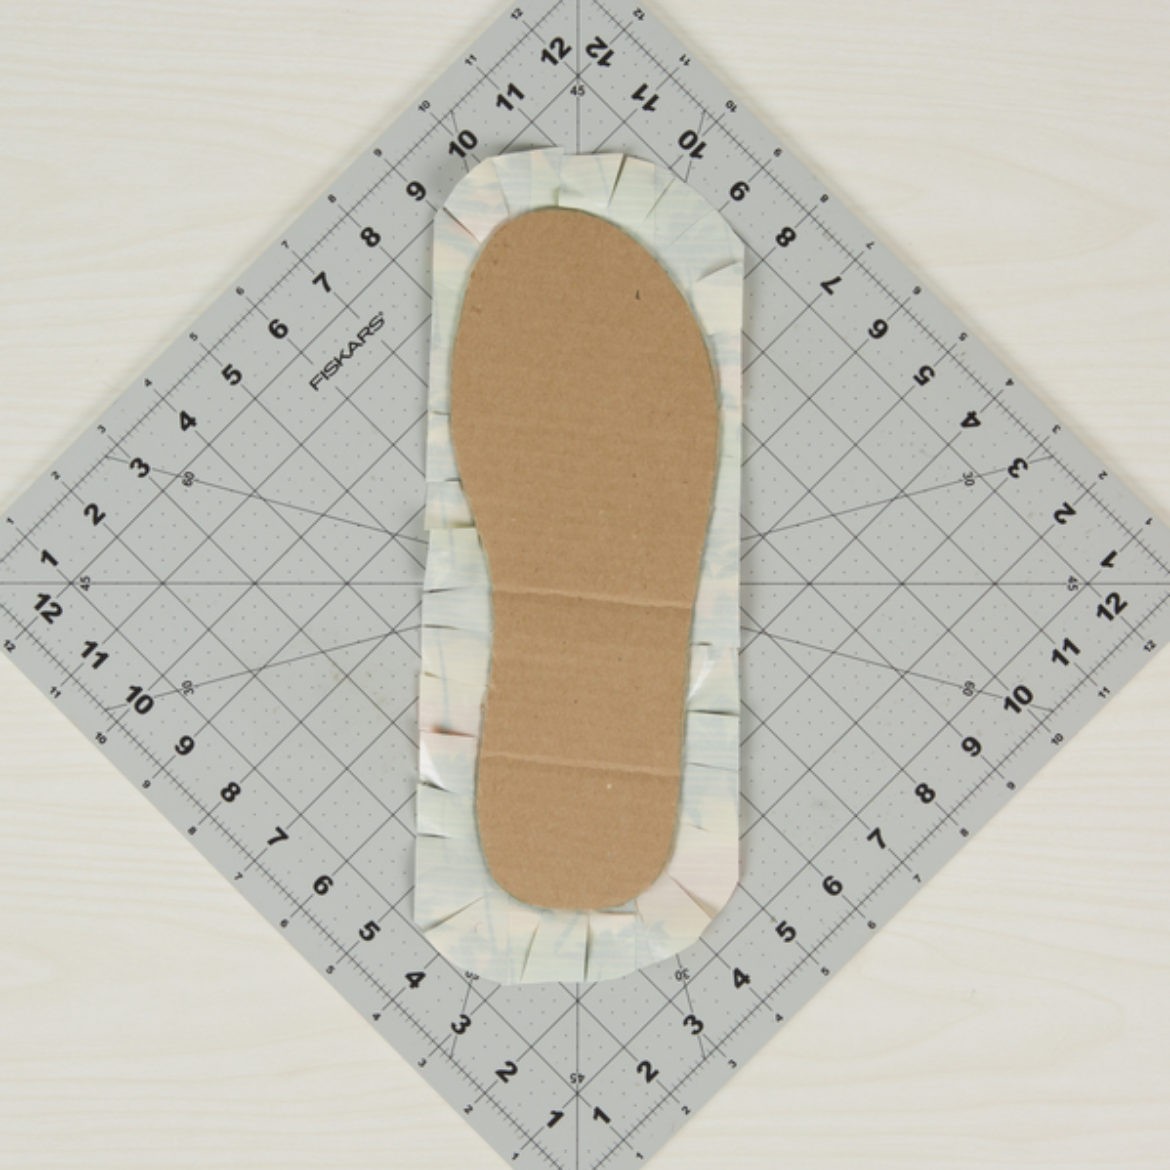 flip over the piece from the previoius step and trim so that there is a boarder of sticky side going around the outside of the flip flop shape. Small slits made into the sticky side